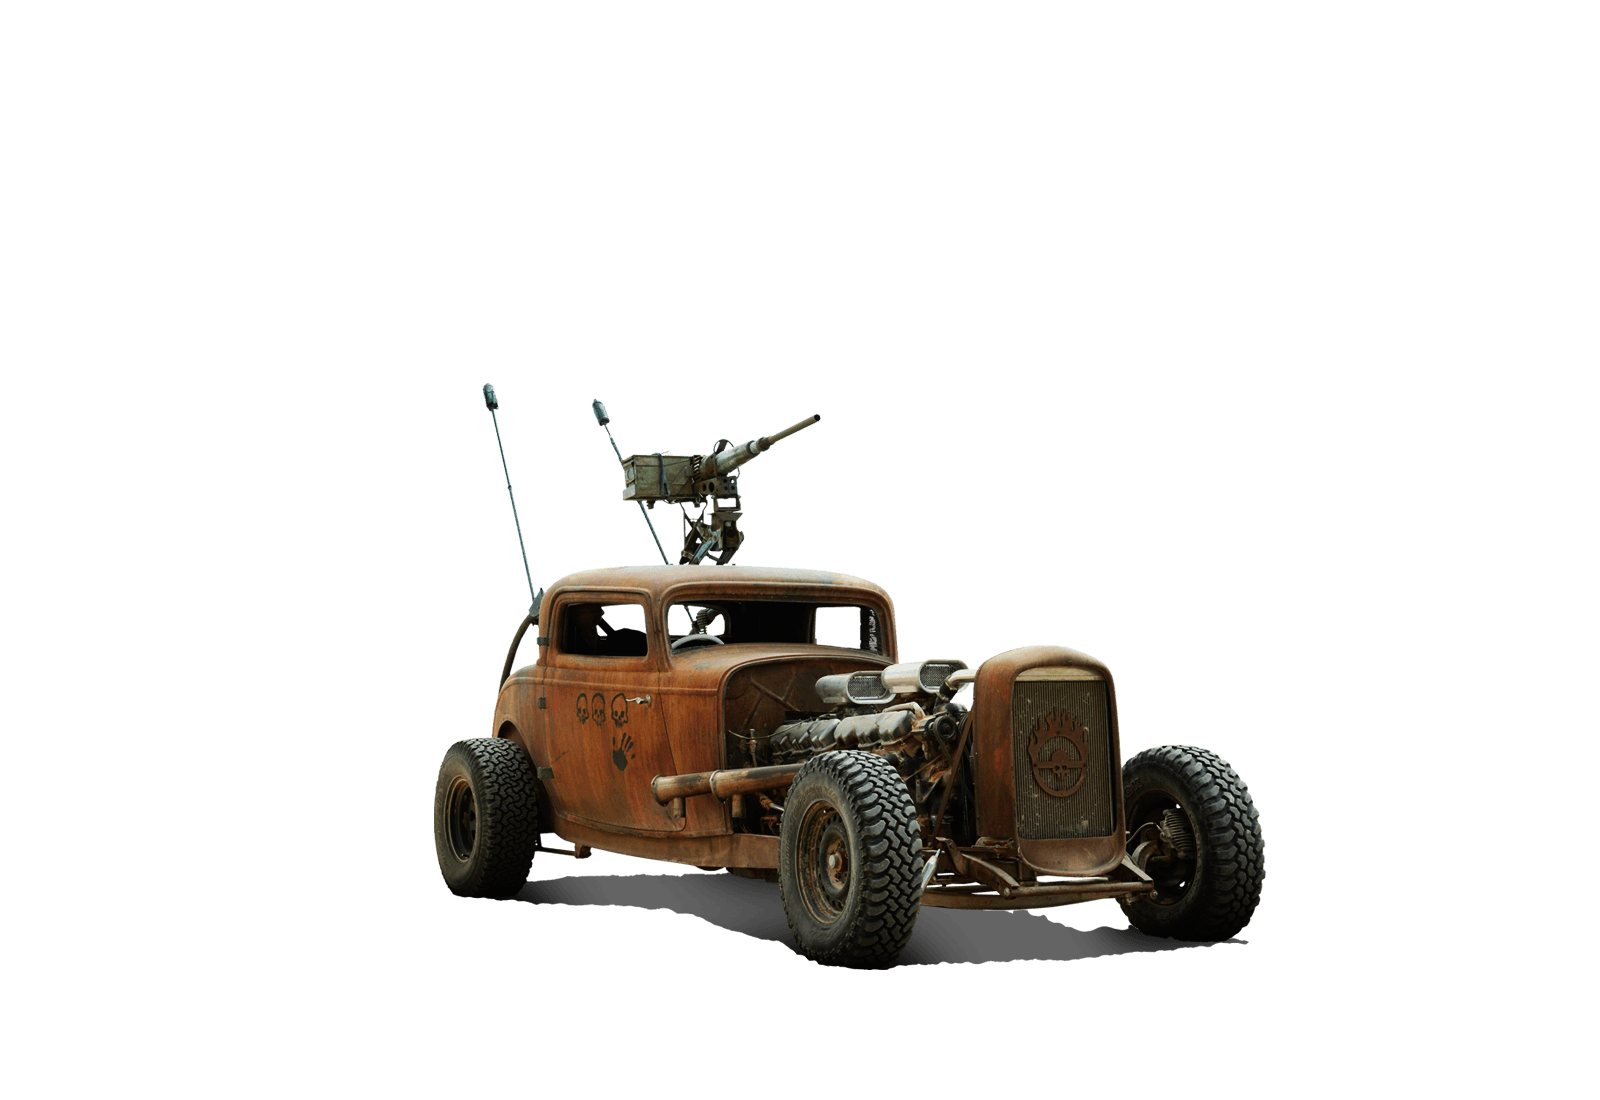 Mad Max Png - Car10.png, Transparent background PNG HD thumbnail